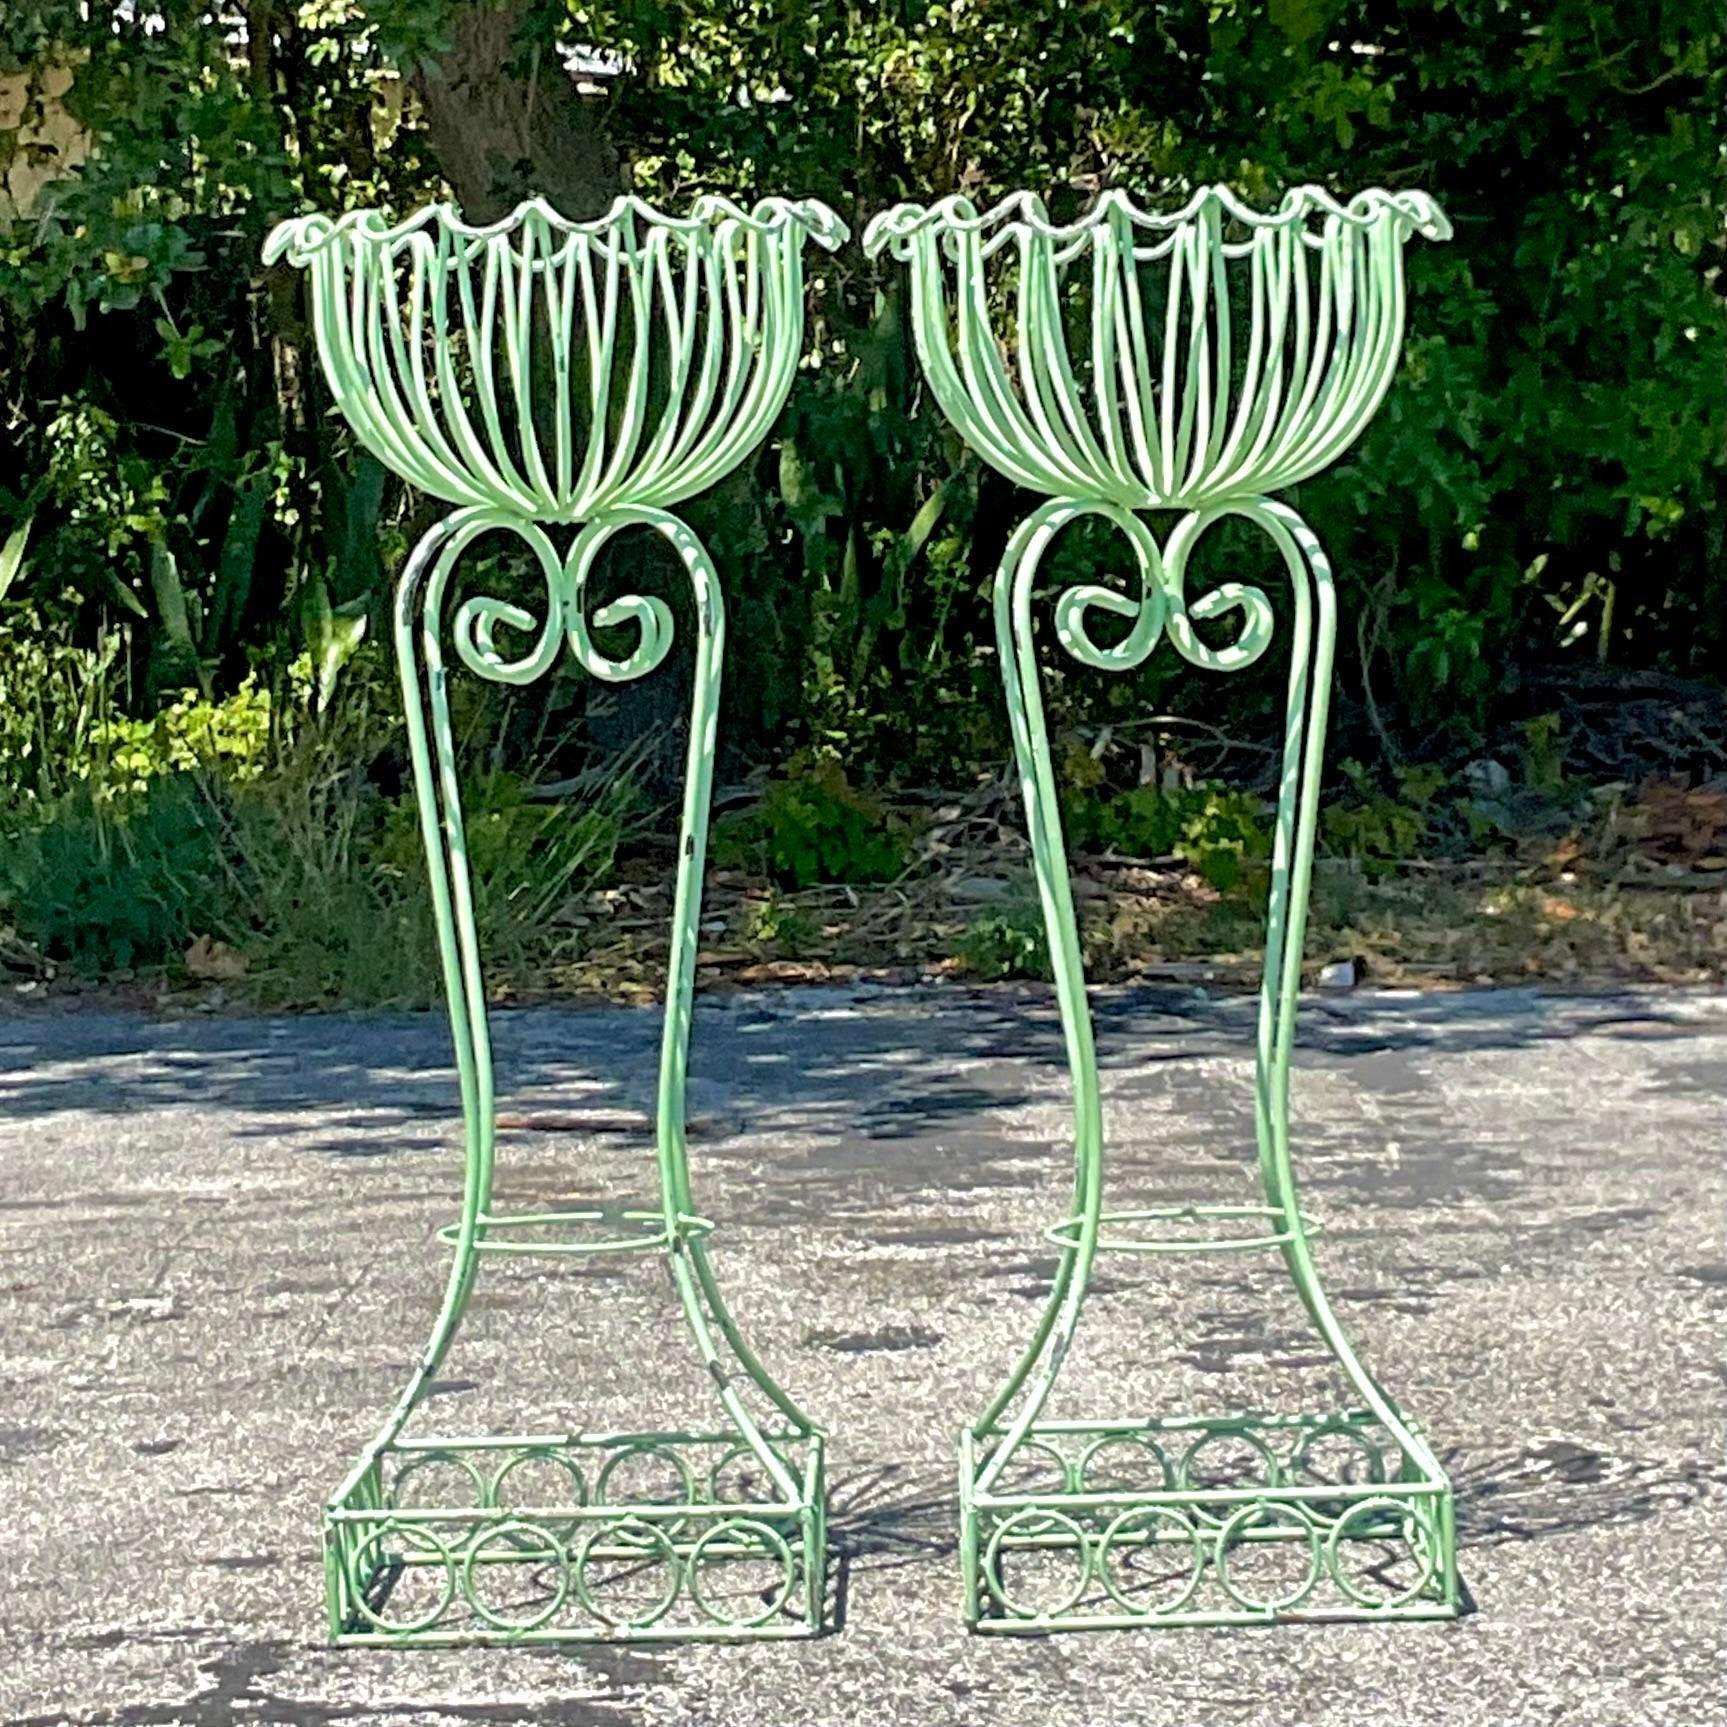 Enhance your botanical display with this pair of vintage Regency wrought iron plant stands. Featuring scalloped edges and elegant design, these American-crafted stands elevate your plants while adding a touch of timeless sophistication to your